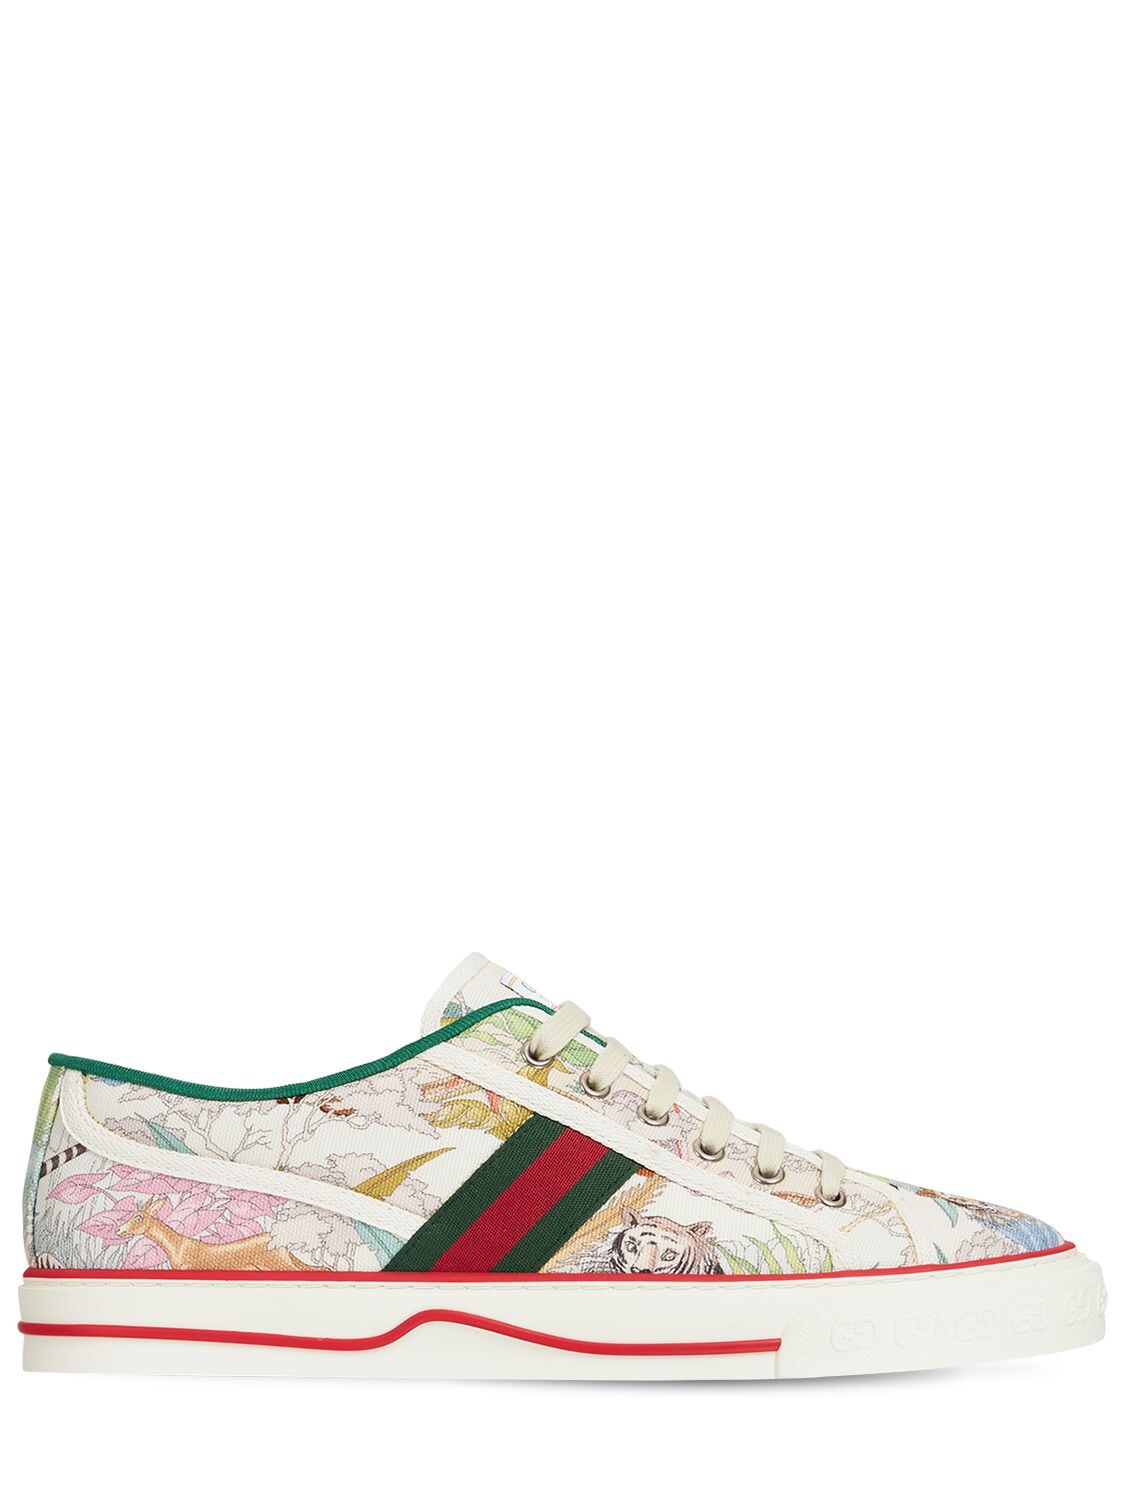 Gucci Tennis 1977 Canvas Sneakers